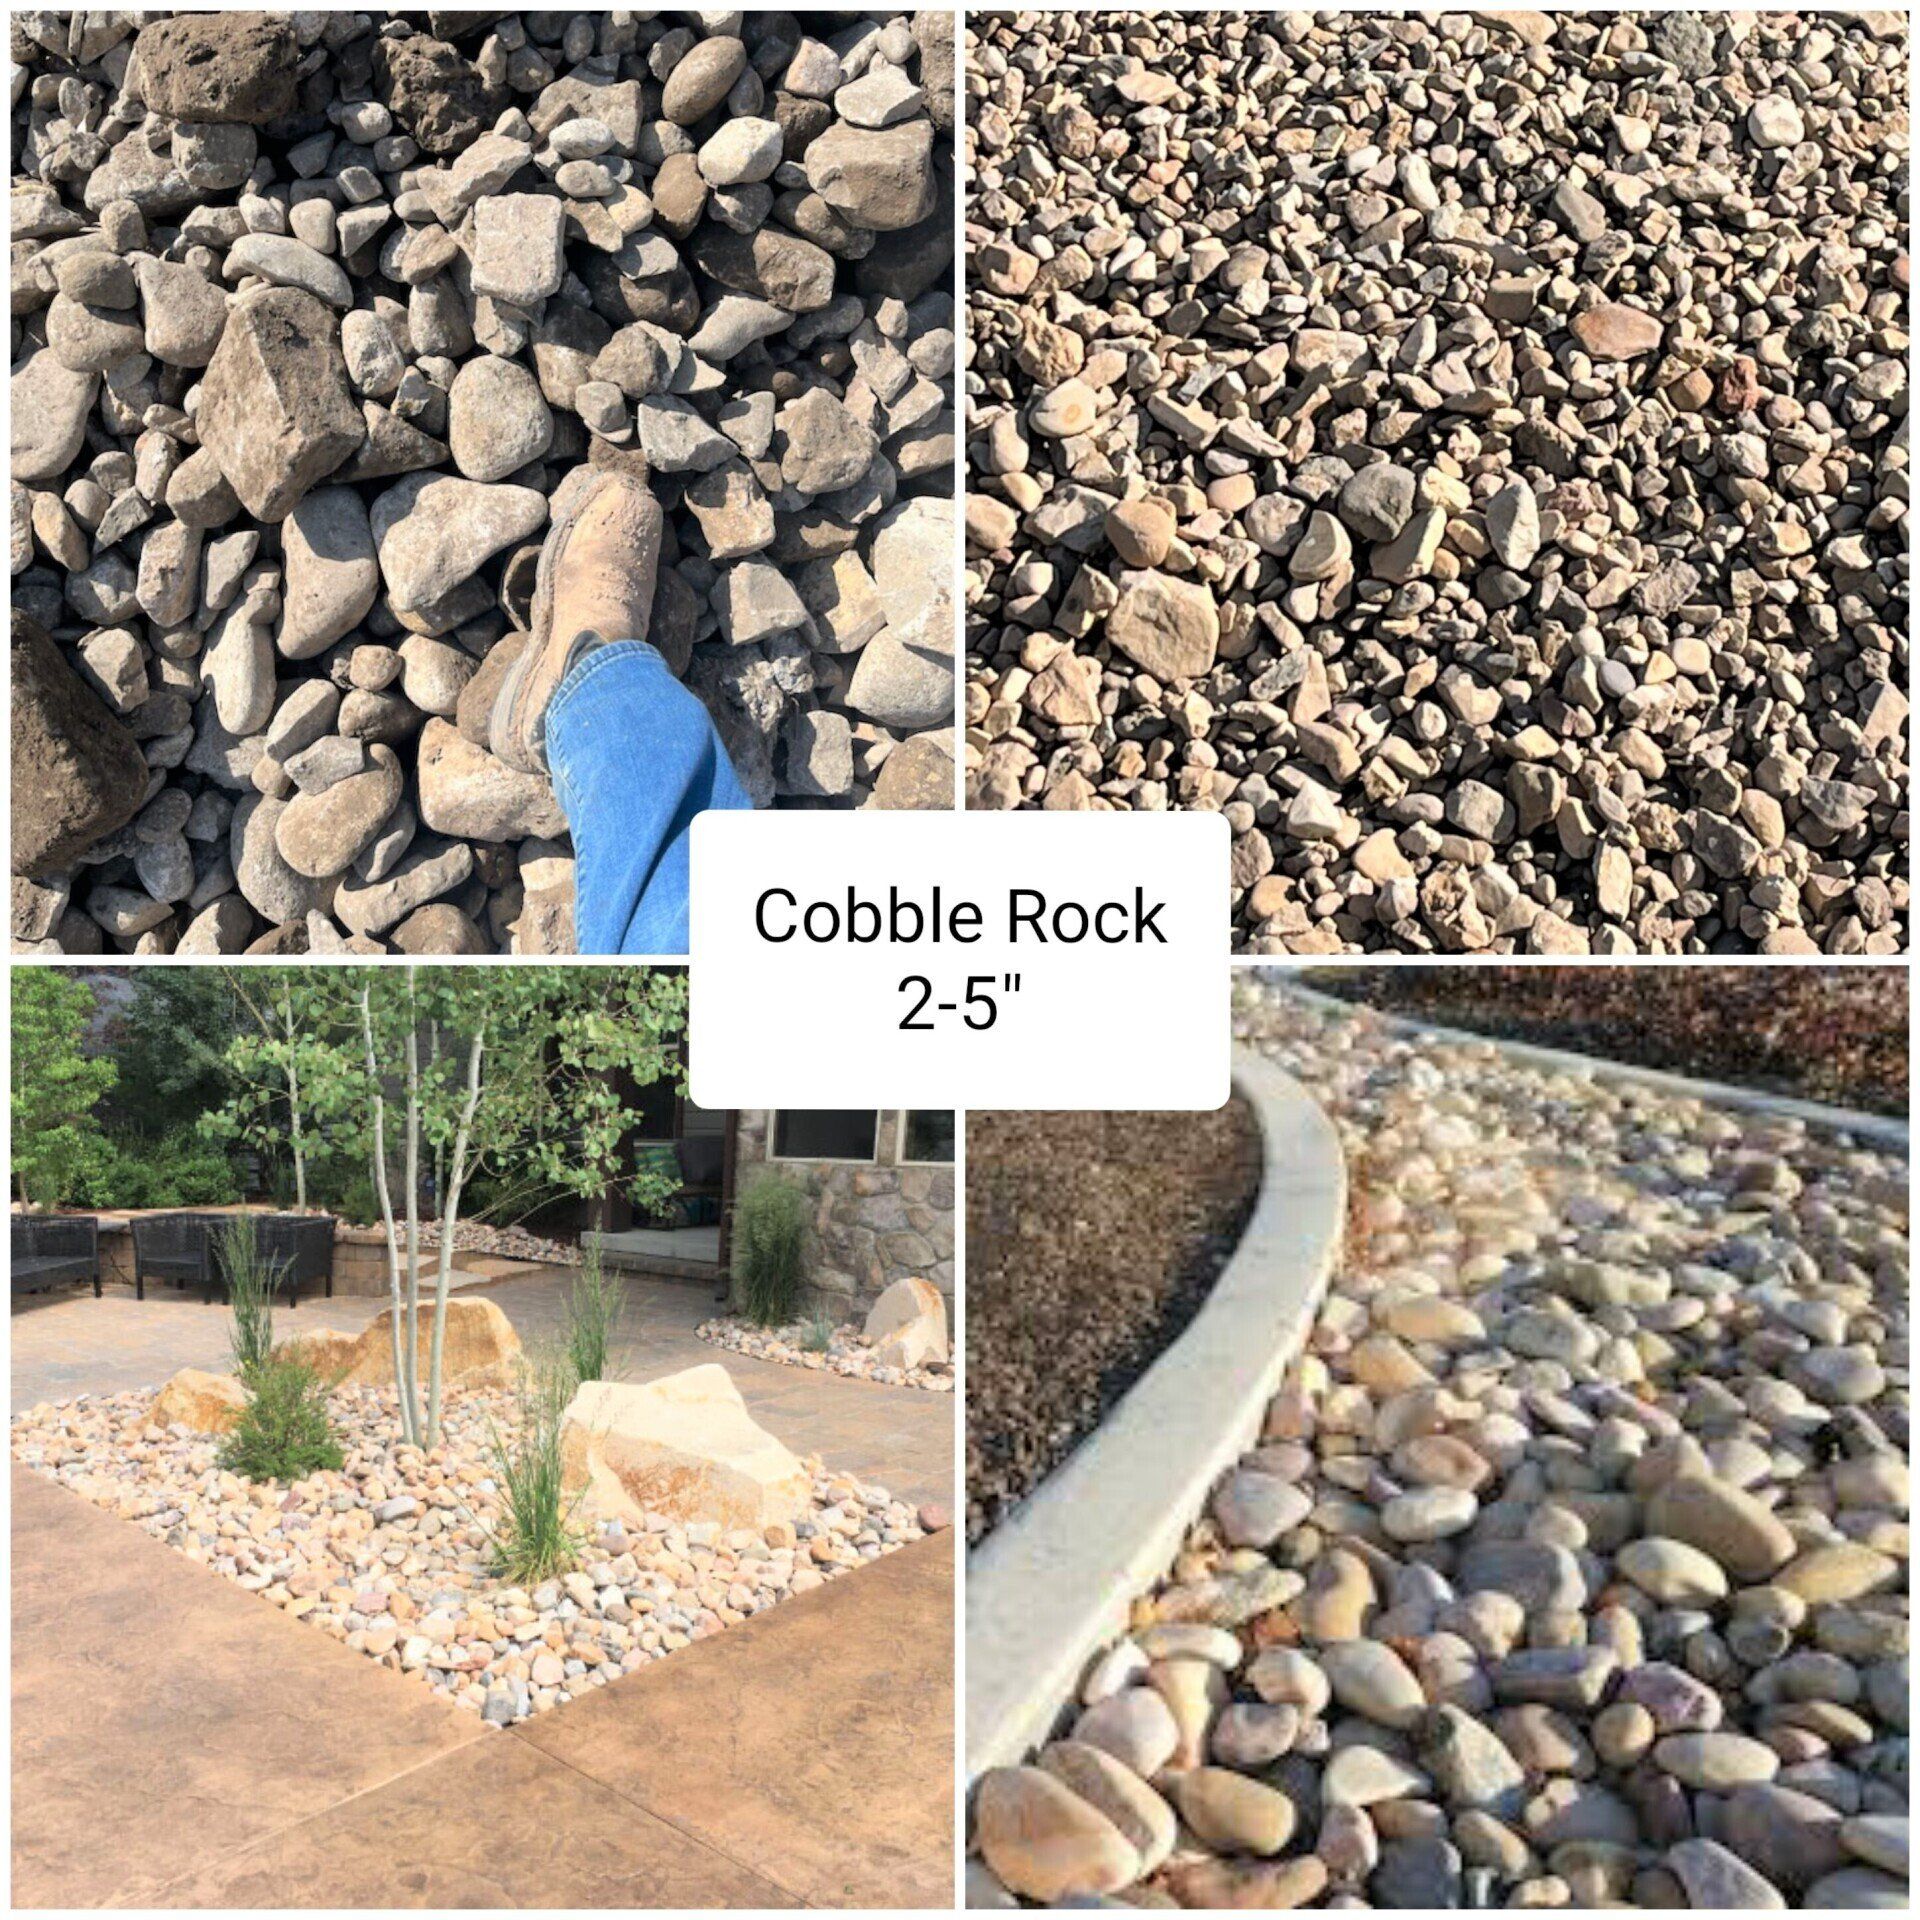 Cobble Rock | Rock Products - Mark's Lawn and Garden Supply Salt Lake City, Utah